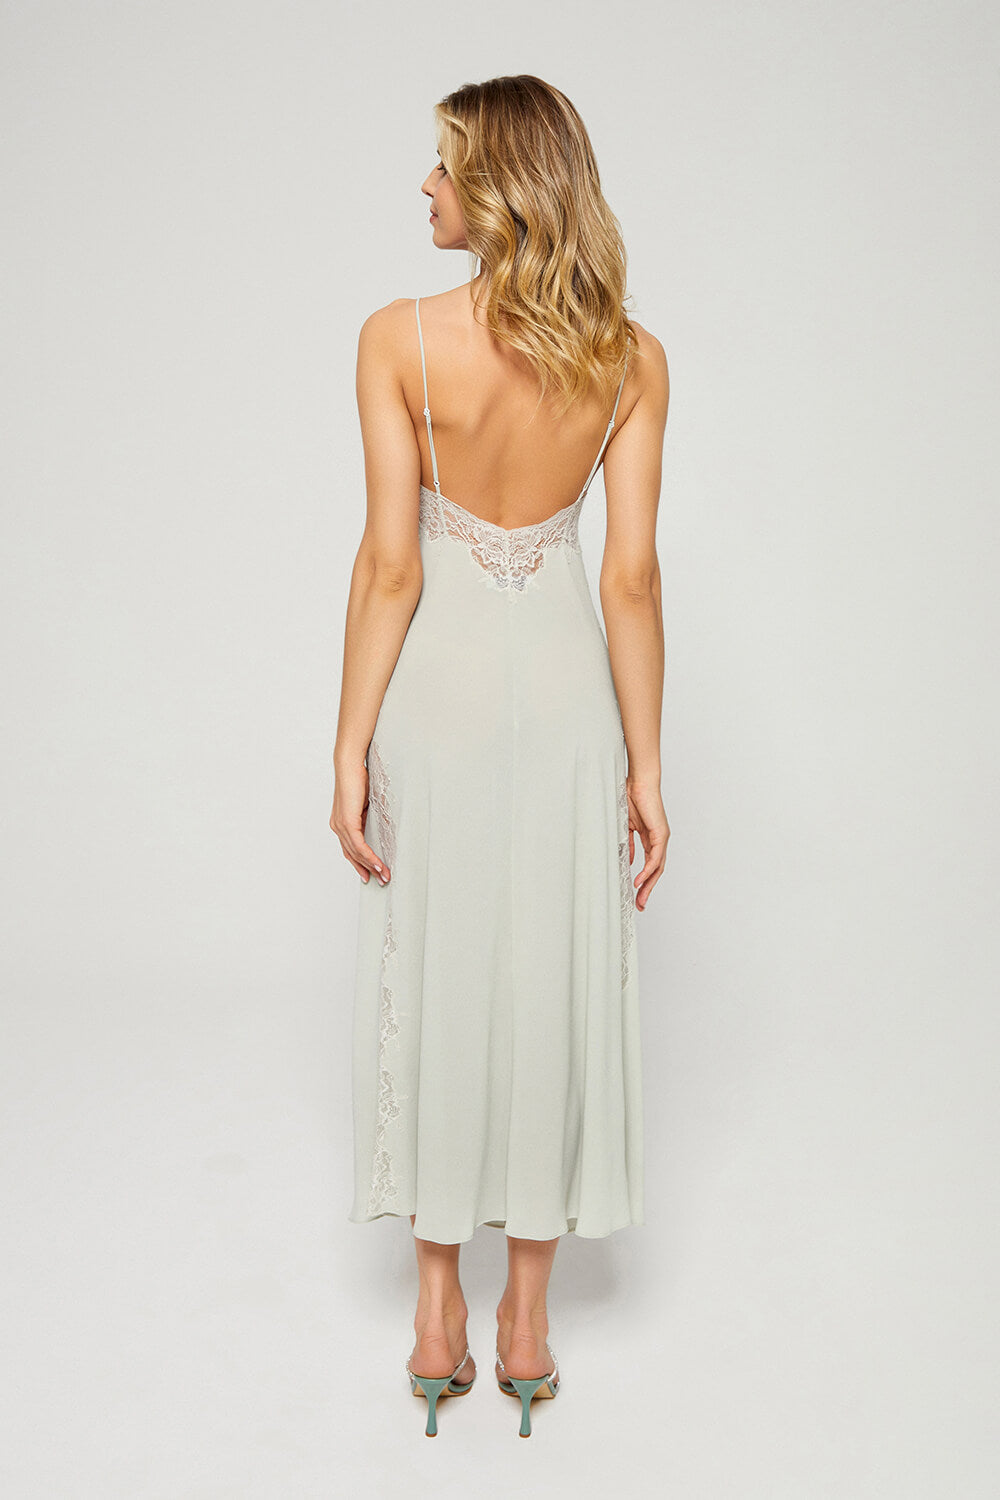 Sage - Long Silk Strapped Nightgown - Mint Green